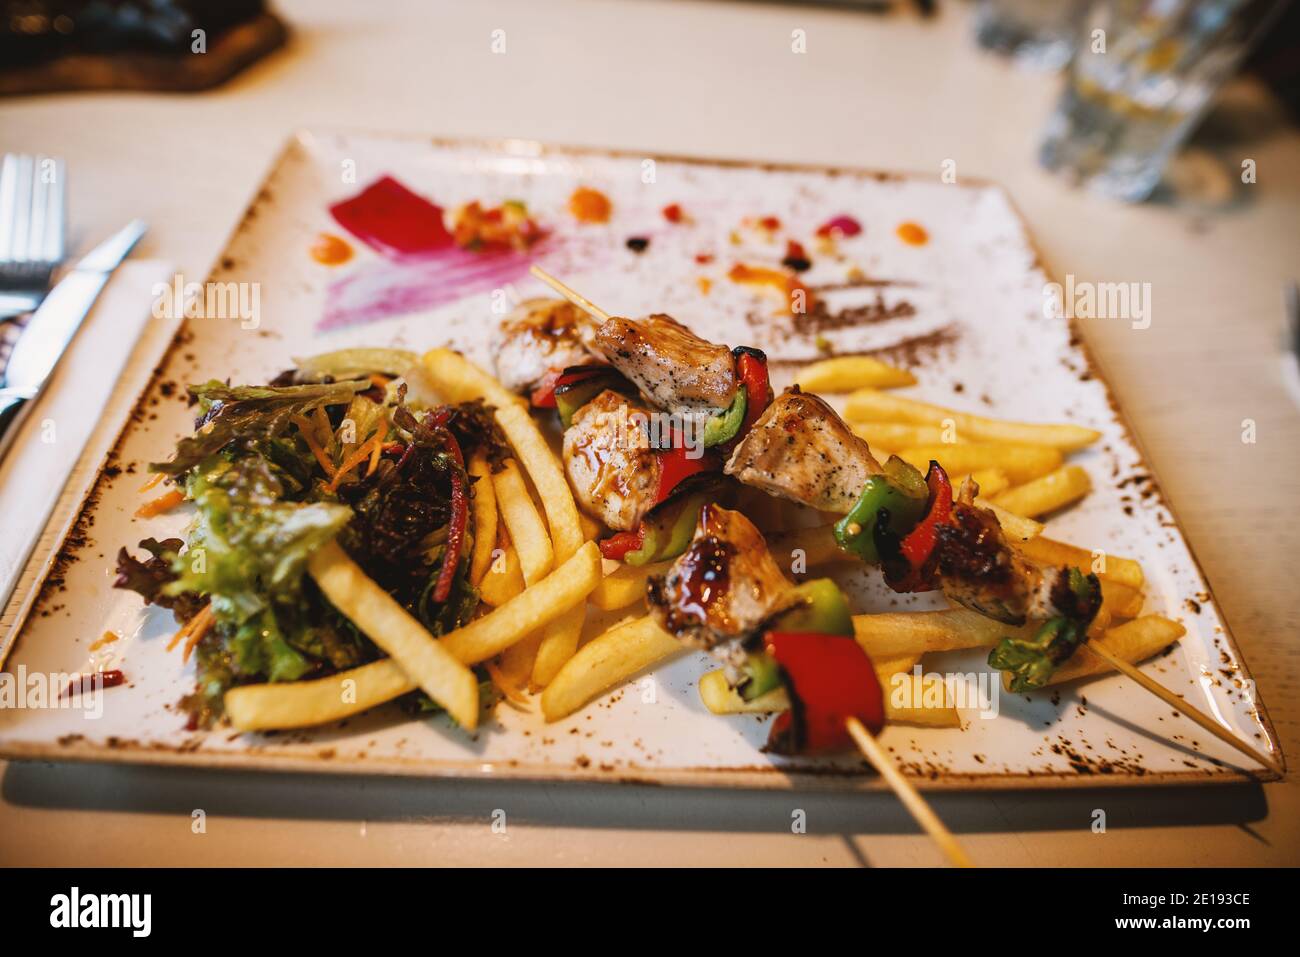 Close up focus view of fried skewers on a wooden stick and chips with salad on the plate in the restaurant. Stock Photo